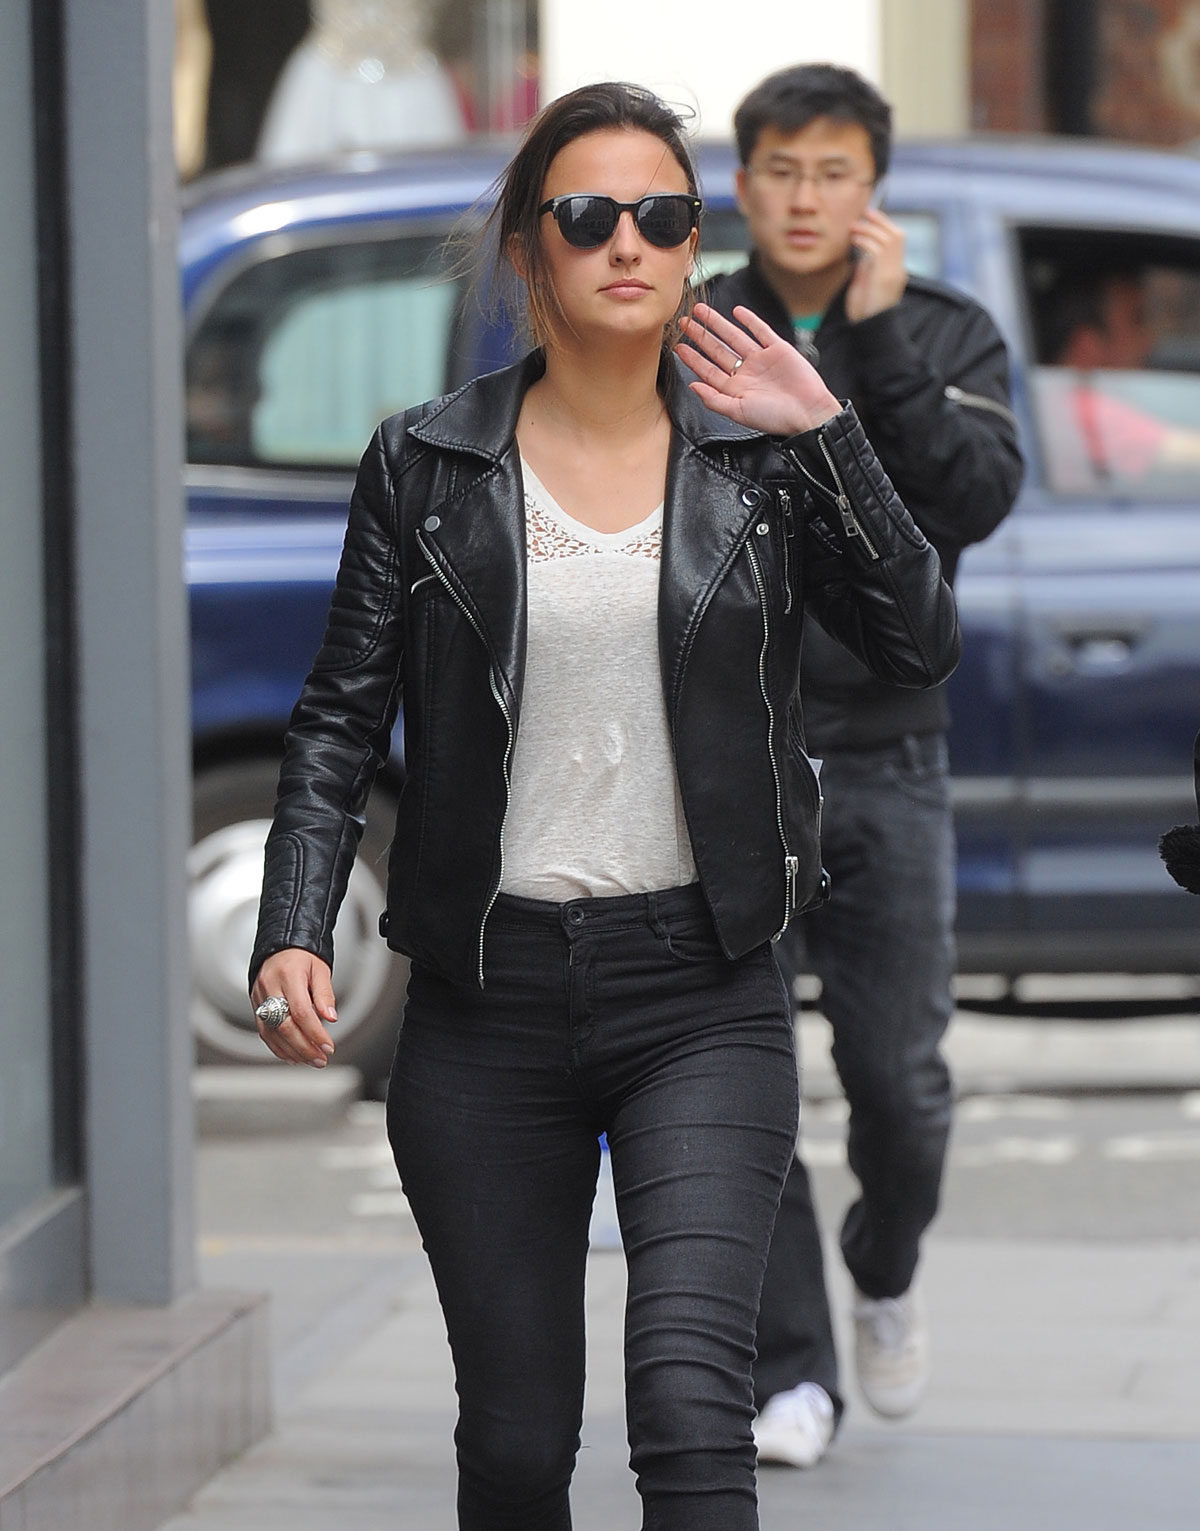 Lucy Watson leaving the Riding House Cafe